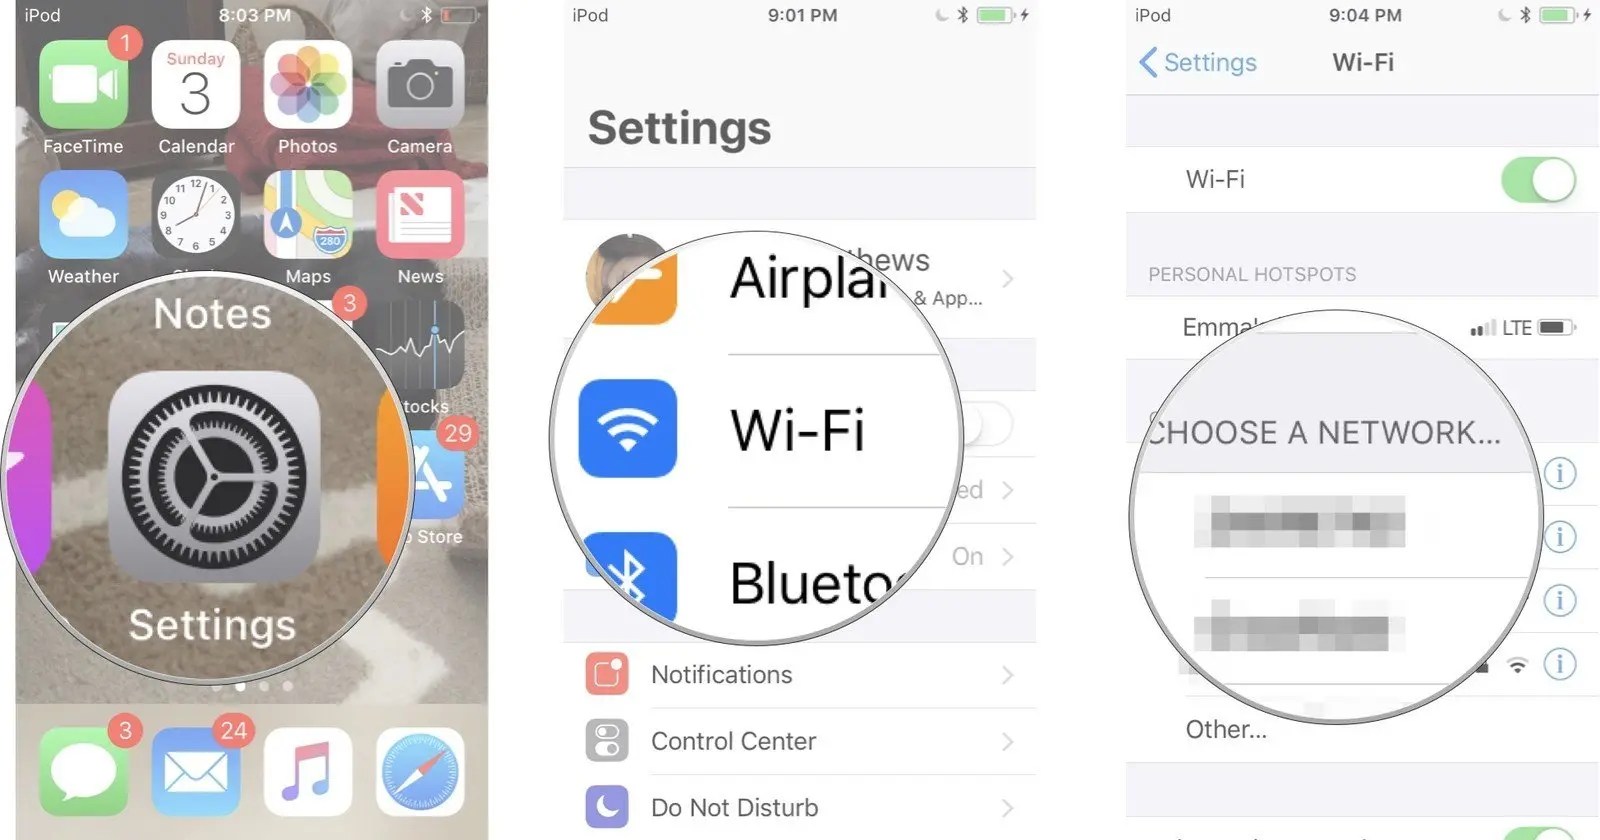 How To Share WiFi Password From Mac To iPhone